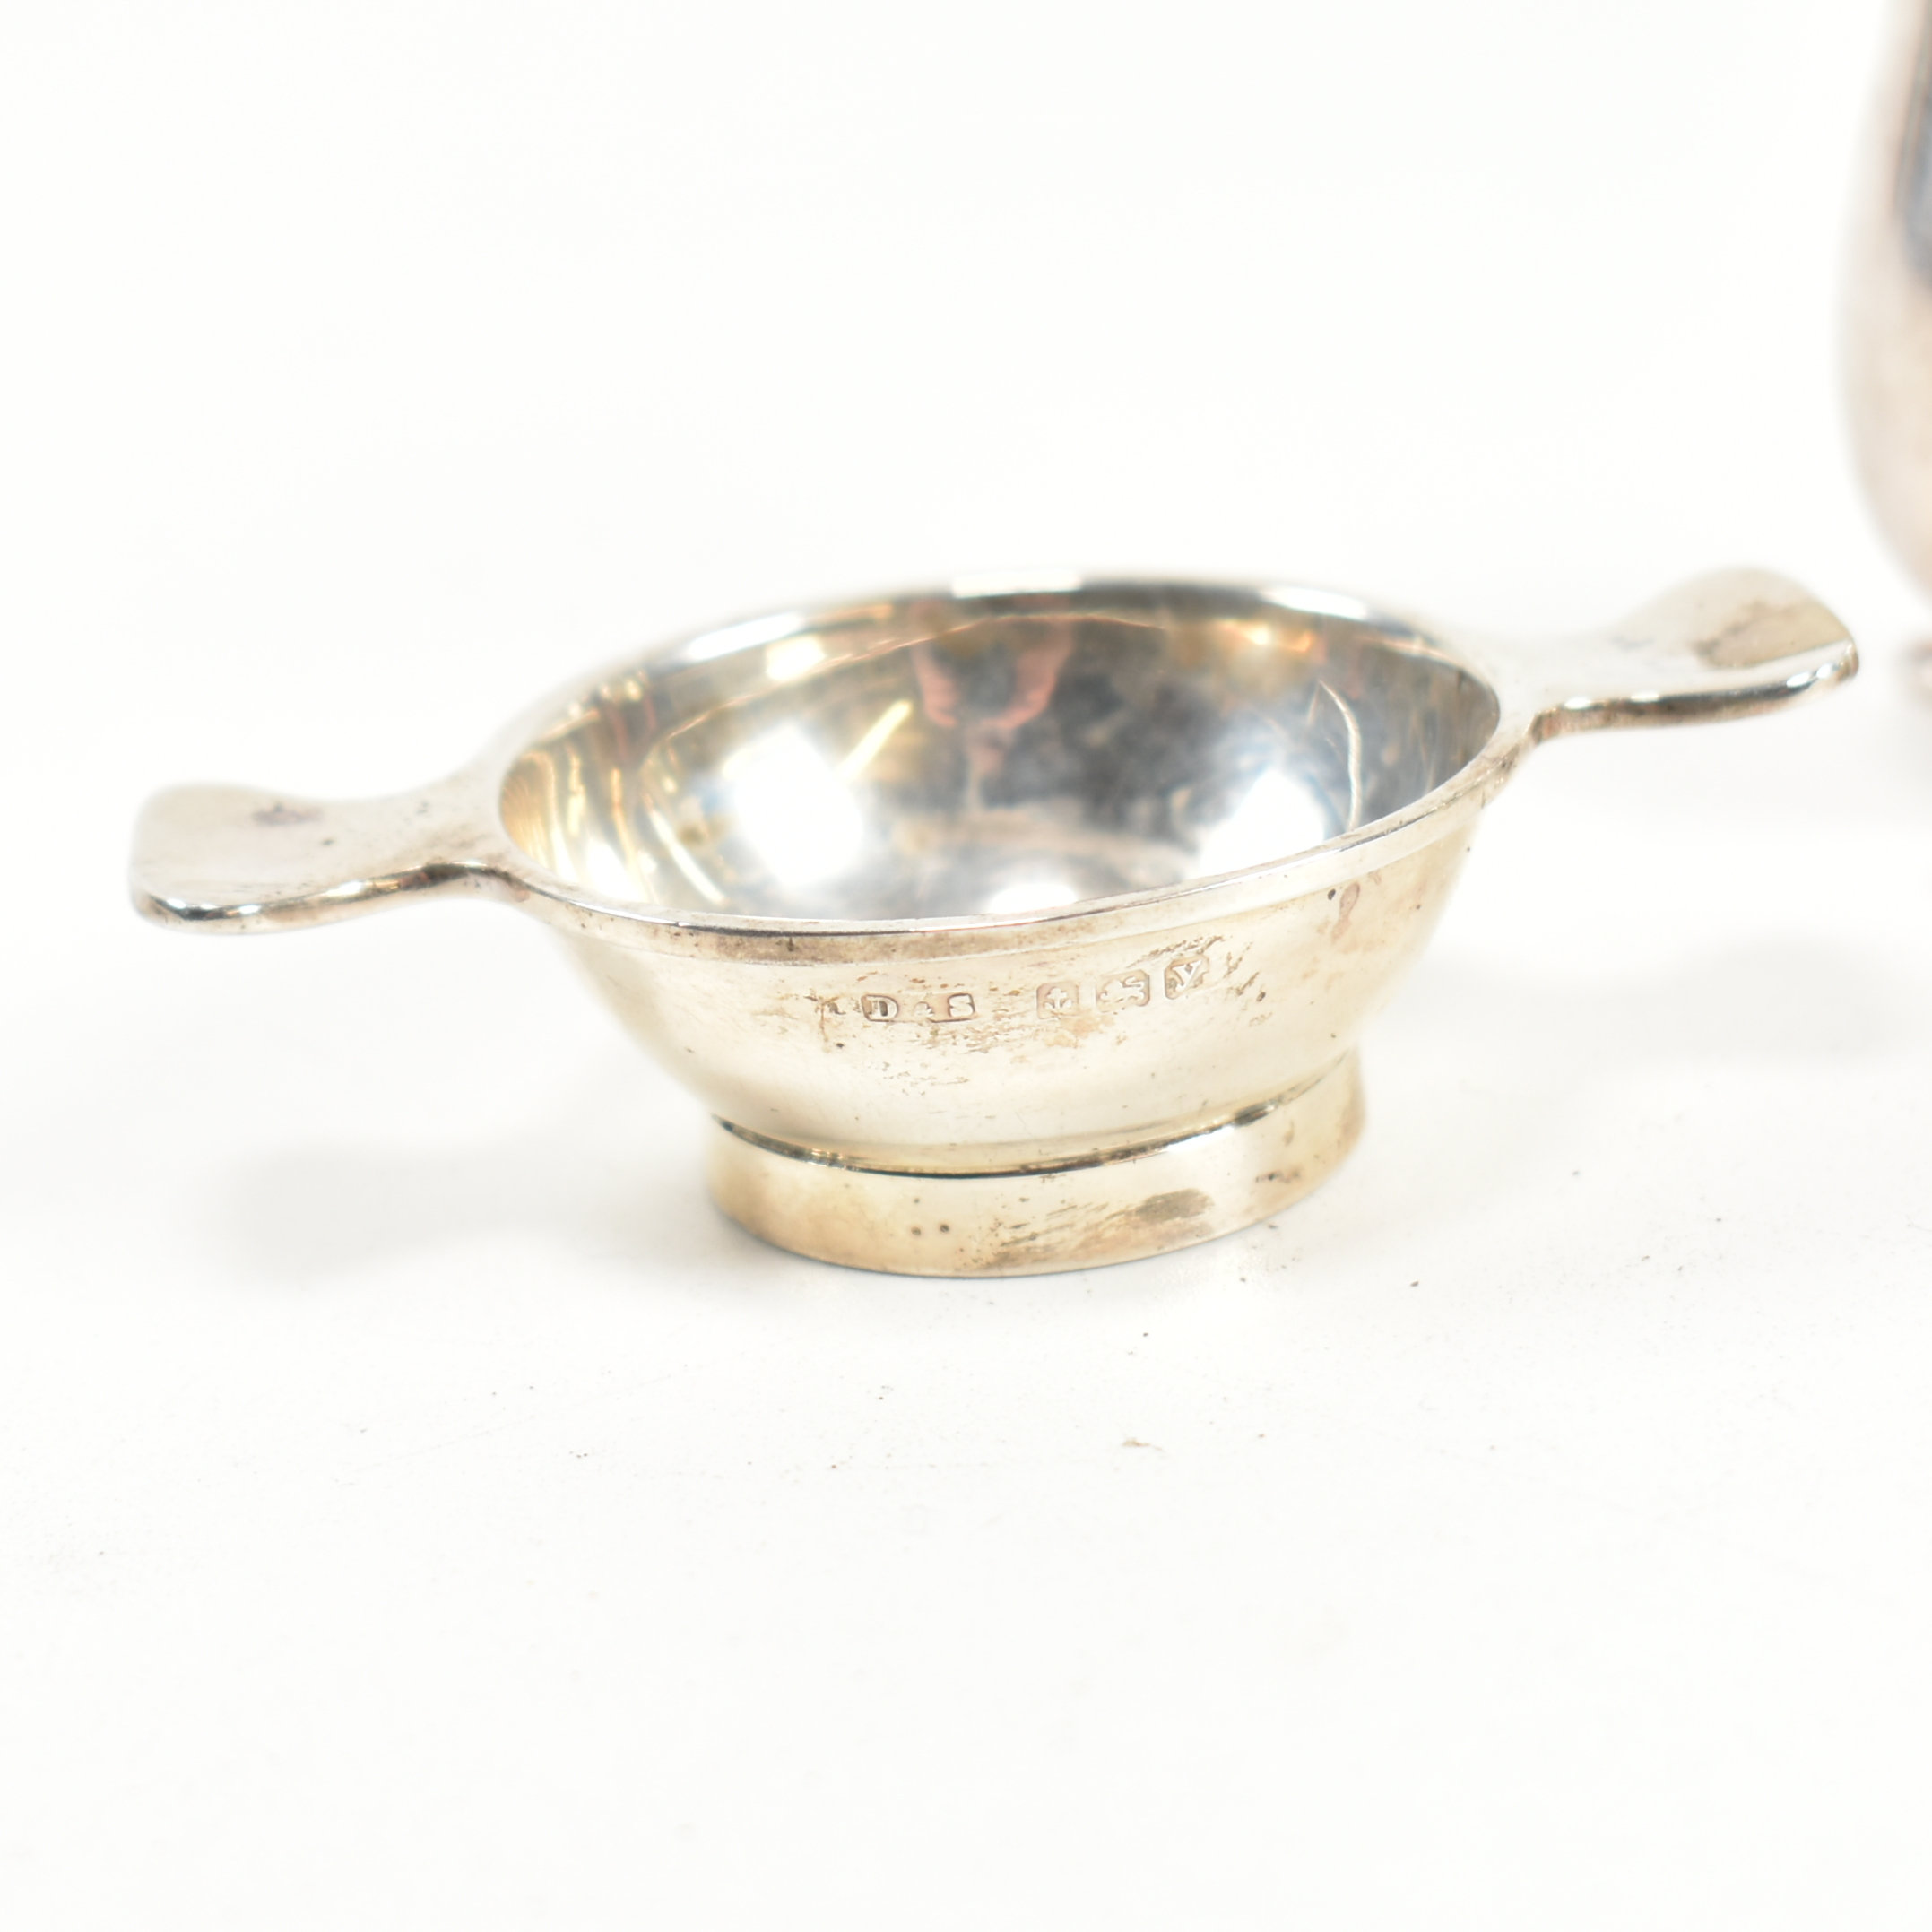 HALLMARKED SILVER ITEMS & SILVER PLATED MAPPIN & WEBB TRAY - Image 6 of 7